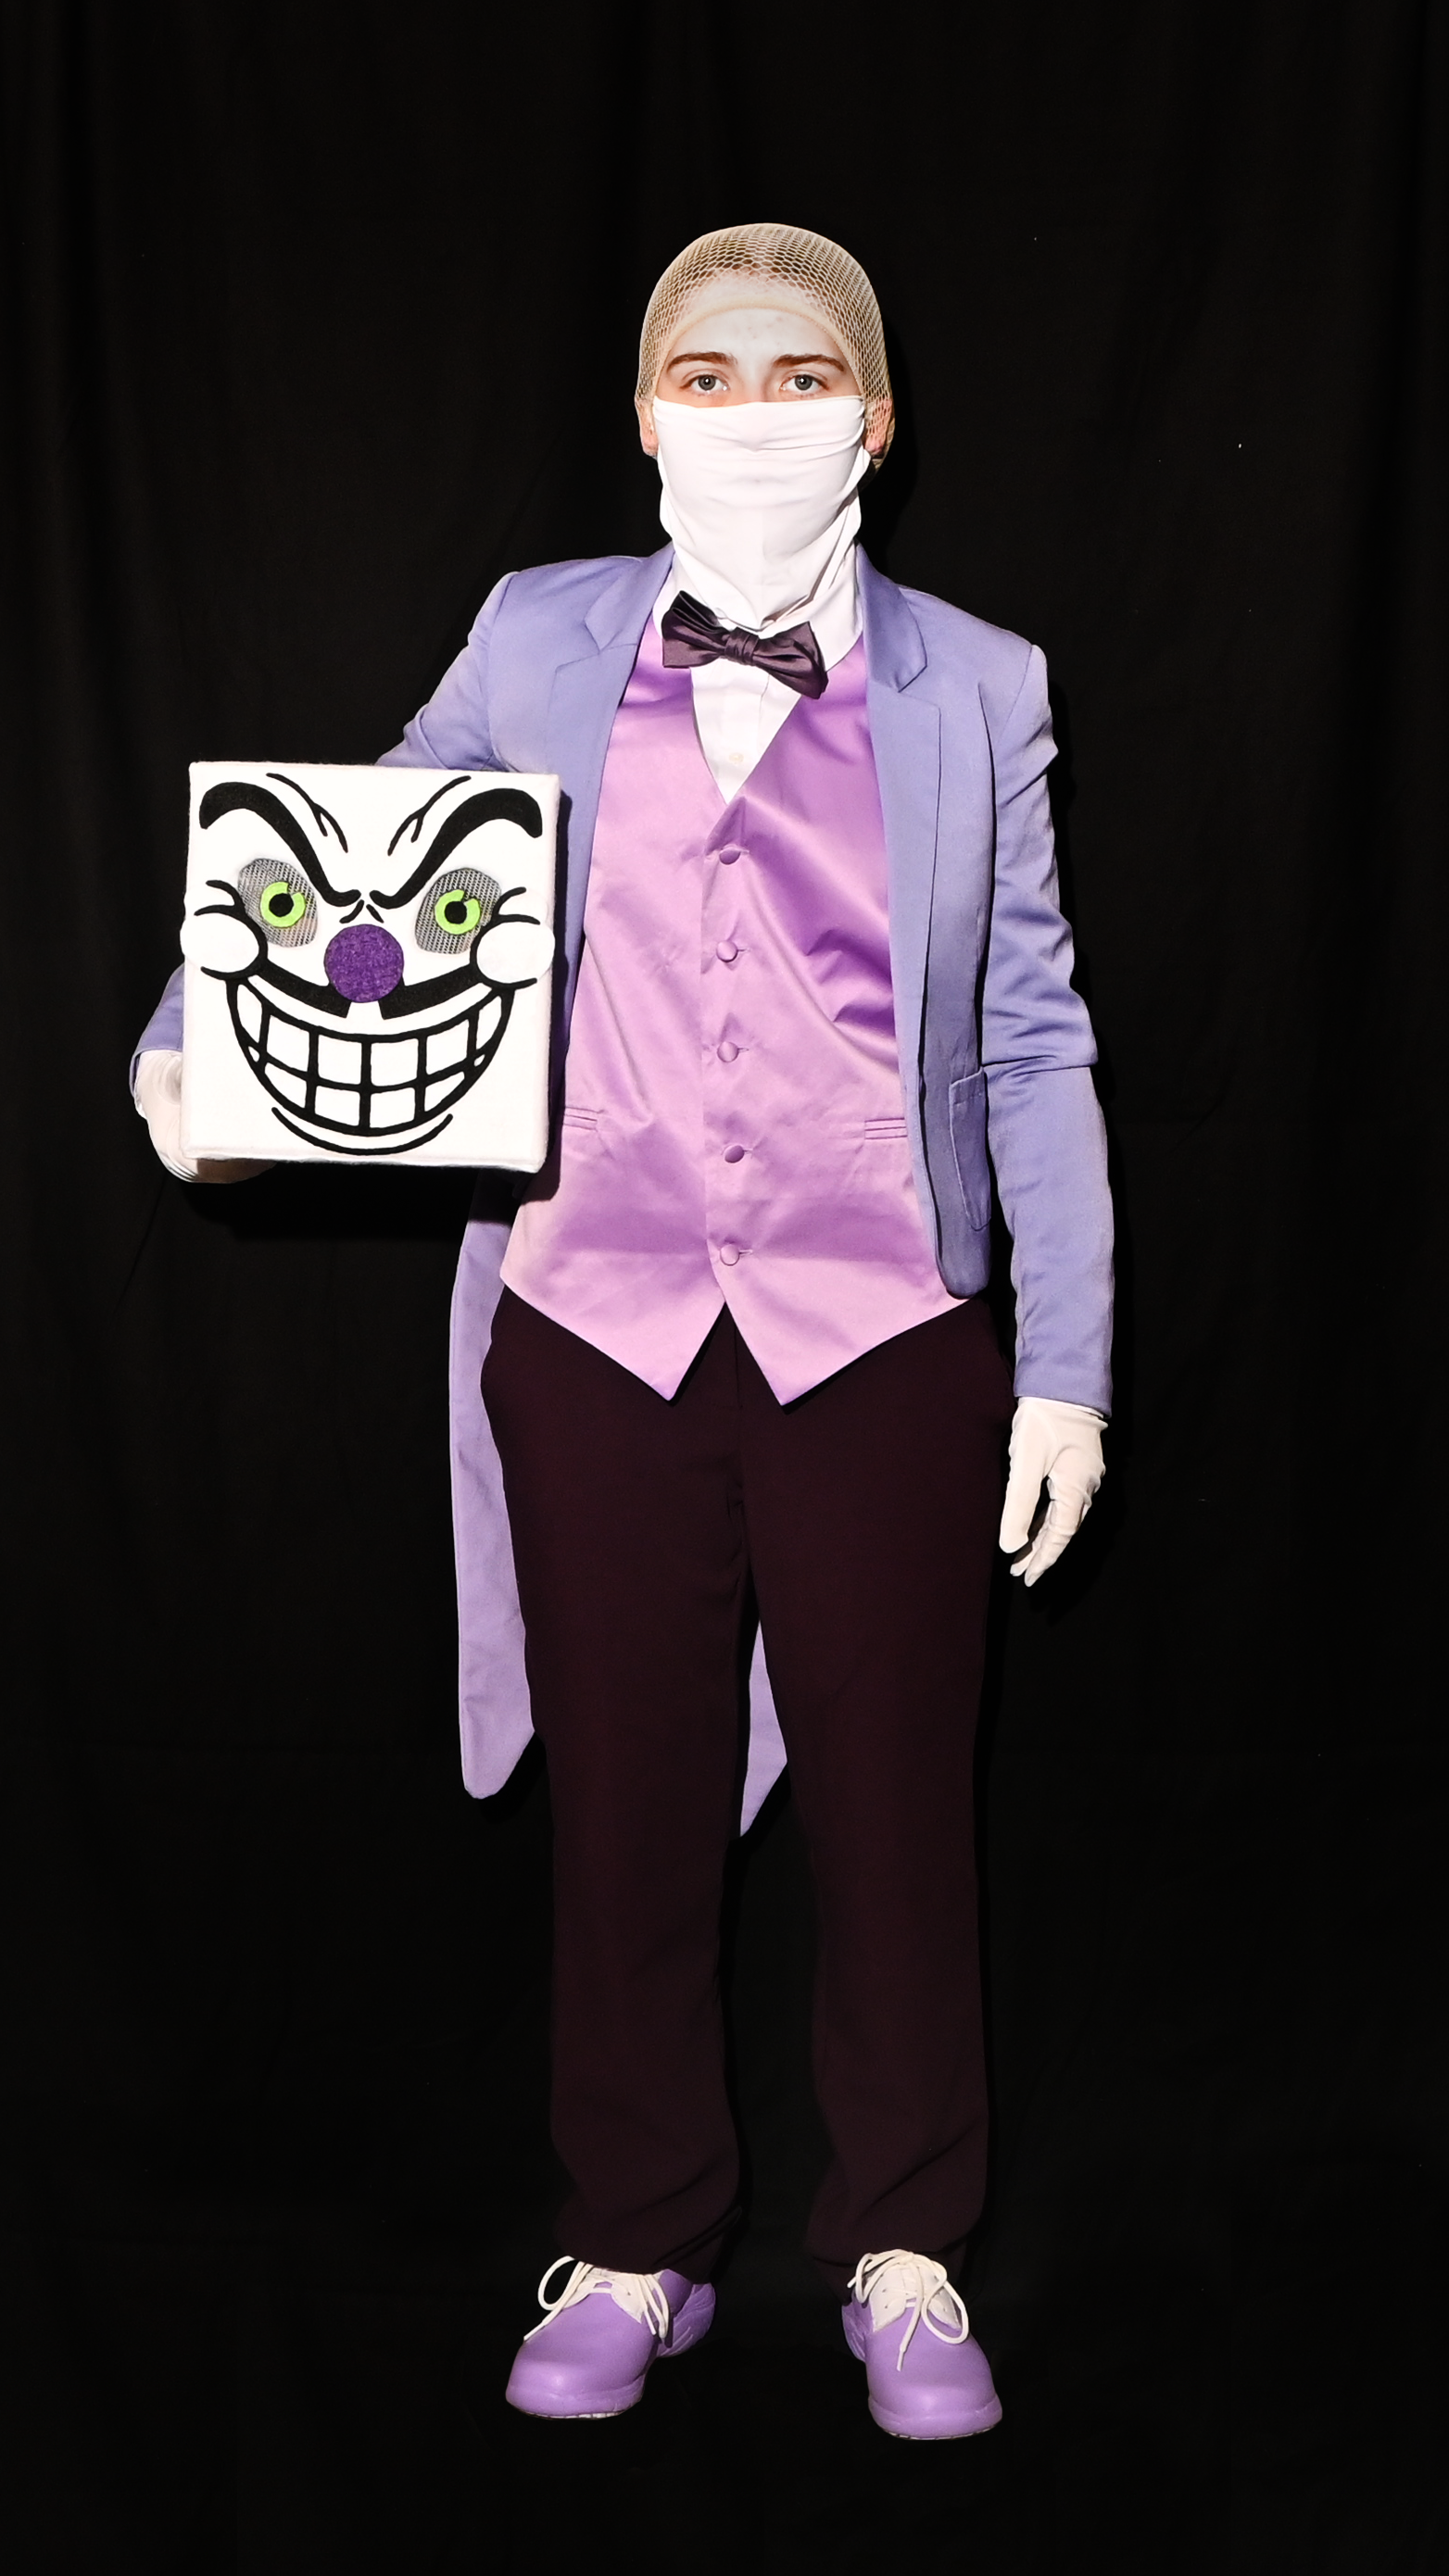 The compendium - What was your cosplay at comic con gent? This is our  founder in his mr kingdice cosplay. #cosplay #cosplayshoot #kingdice  #cuphead #mrkingdice #comiccongent #cosplay_compendium Pictures by  cosplaycloud